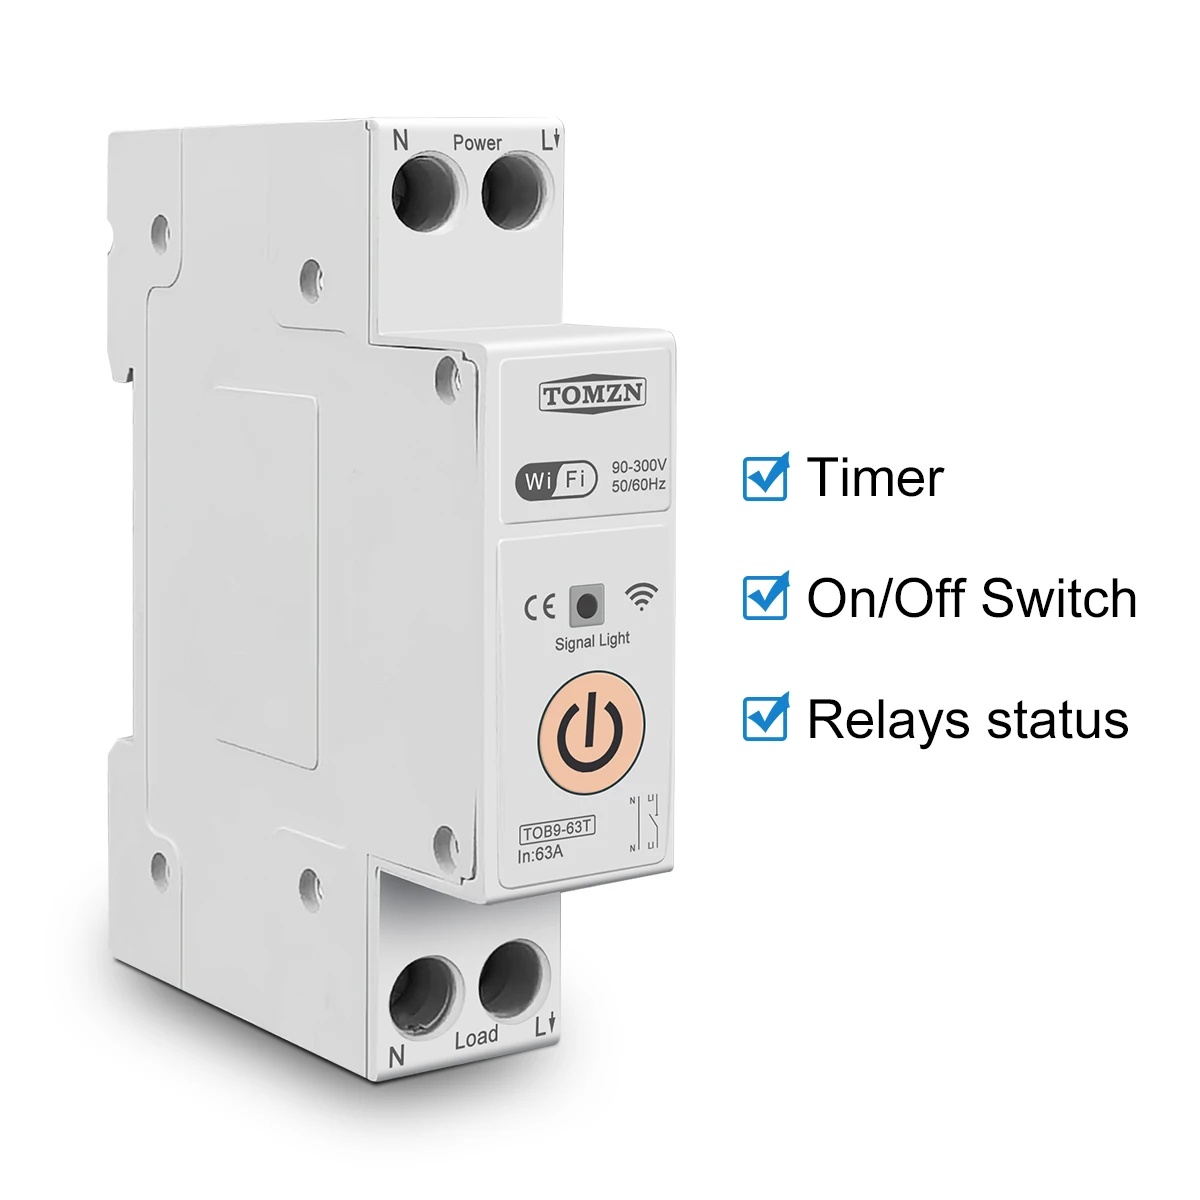 TOB9 63A 1P+N WIFI Smart Switch Energy Meter Kwh Metering Monitoring Timer Relay MCB TUYA smartlife voltage current protection